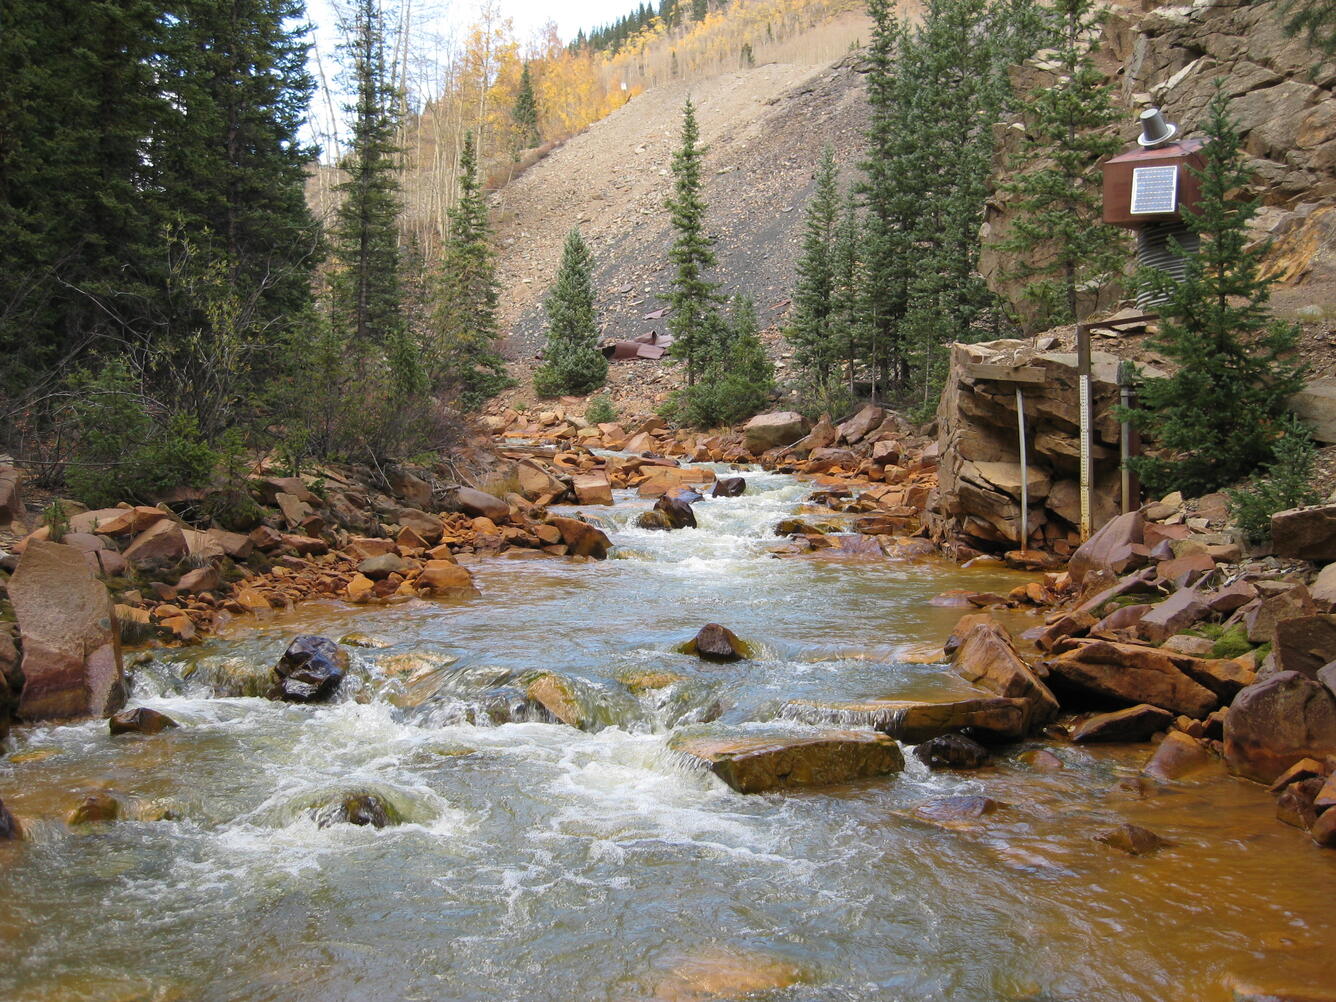 Photo of USGS streamgage 09358550 at Cement Creek at Silverton, Colorado.